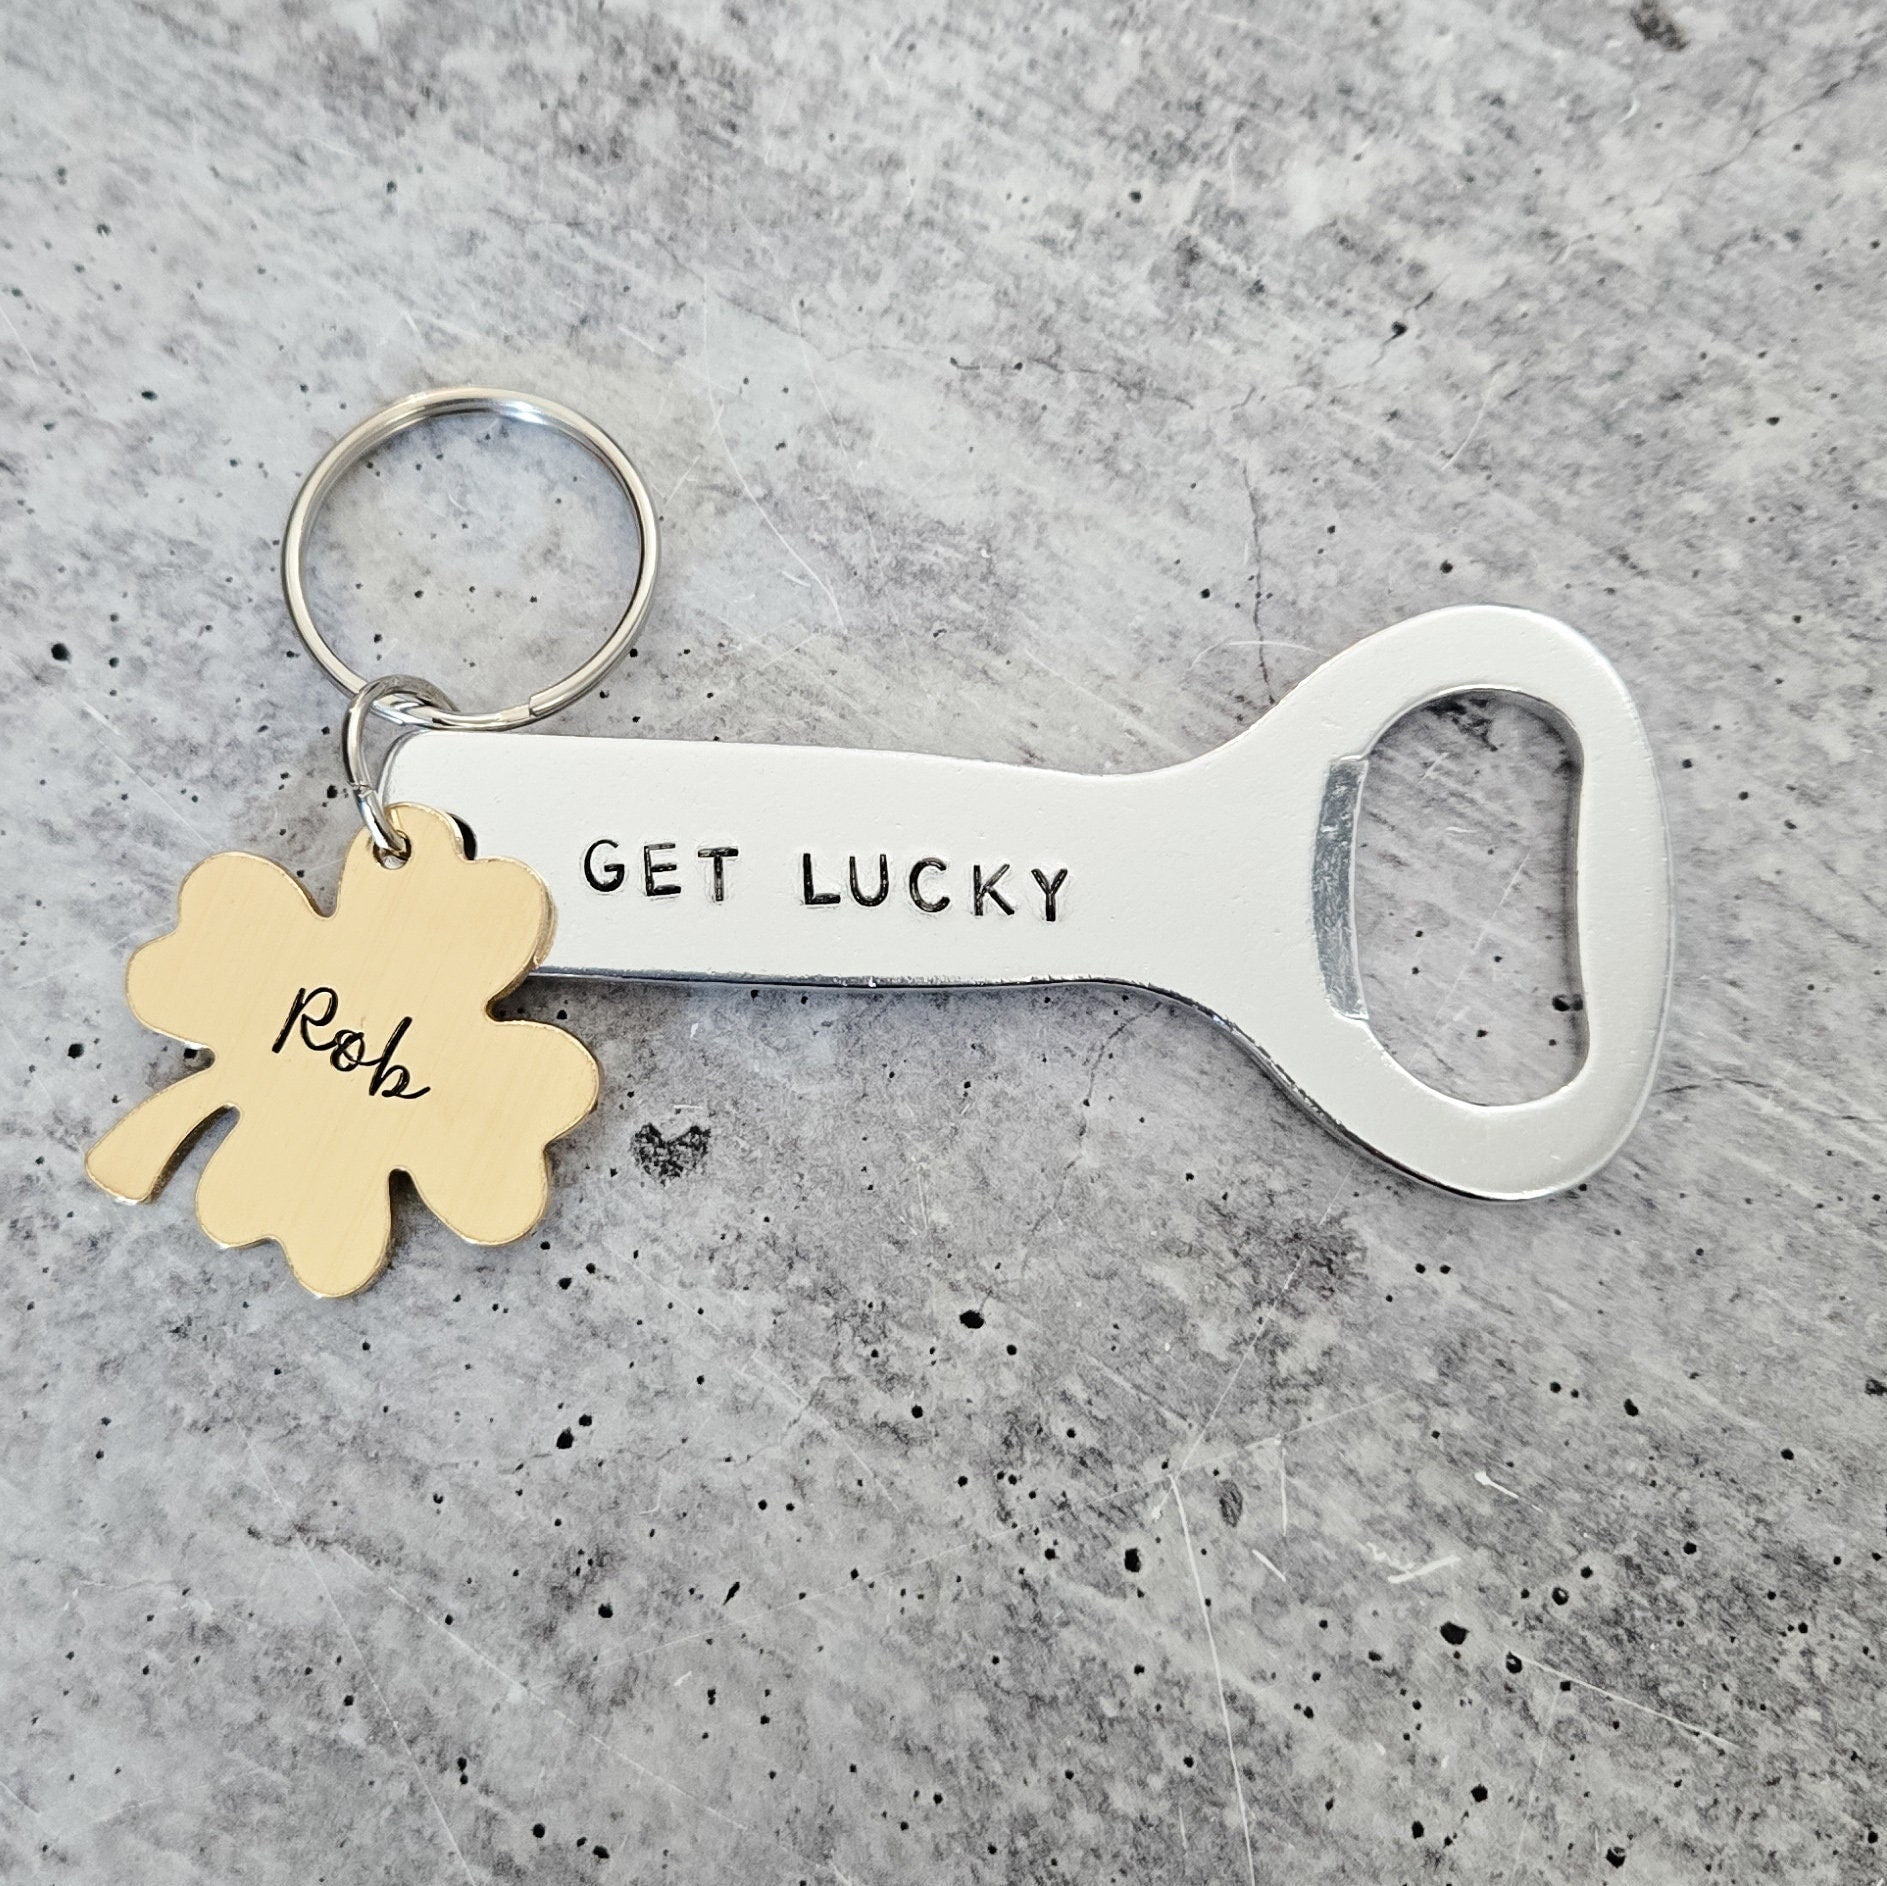 GET LUCKY Personalized St. Patrick's Day Beer Bottle Opener Keychain - St. Paddy's Day Gift for Husband Salt and Sparkle